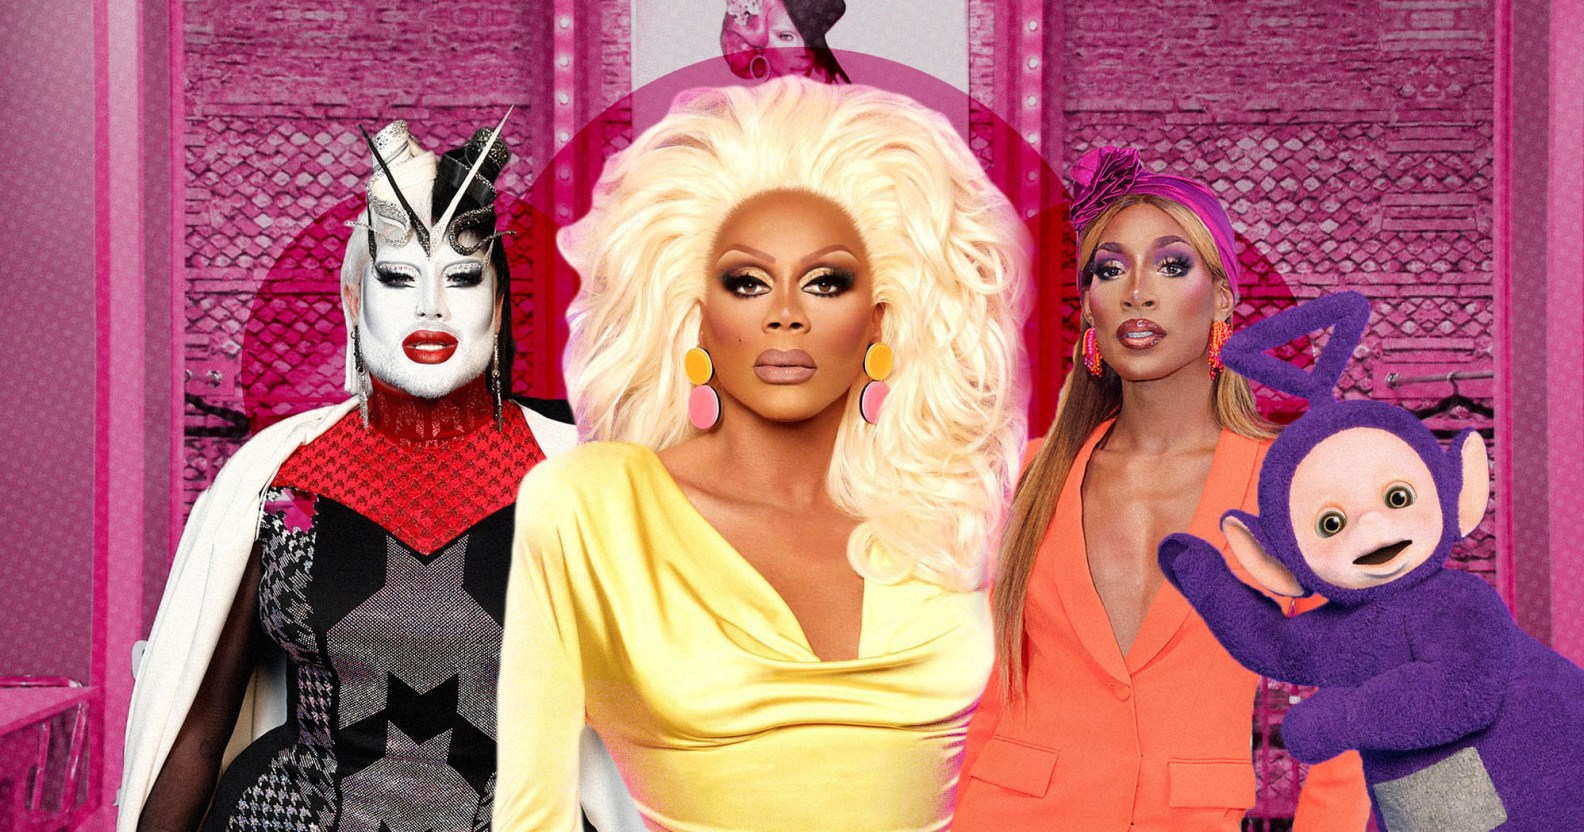 A graphic composite showing some of RuPaul's Drag Race contestants sat next to each other with one of the Teletubbies, Tinky-Winky, superimposed over the right-hand side of the image